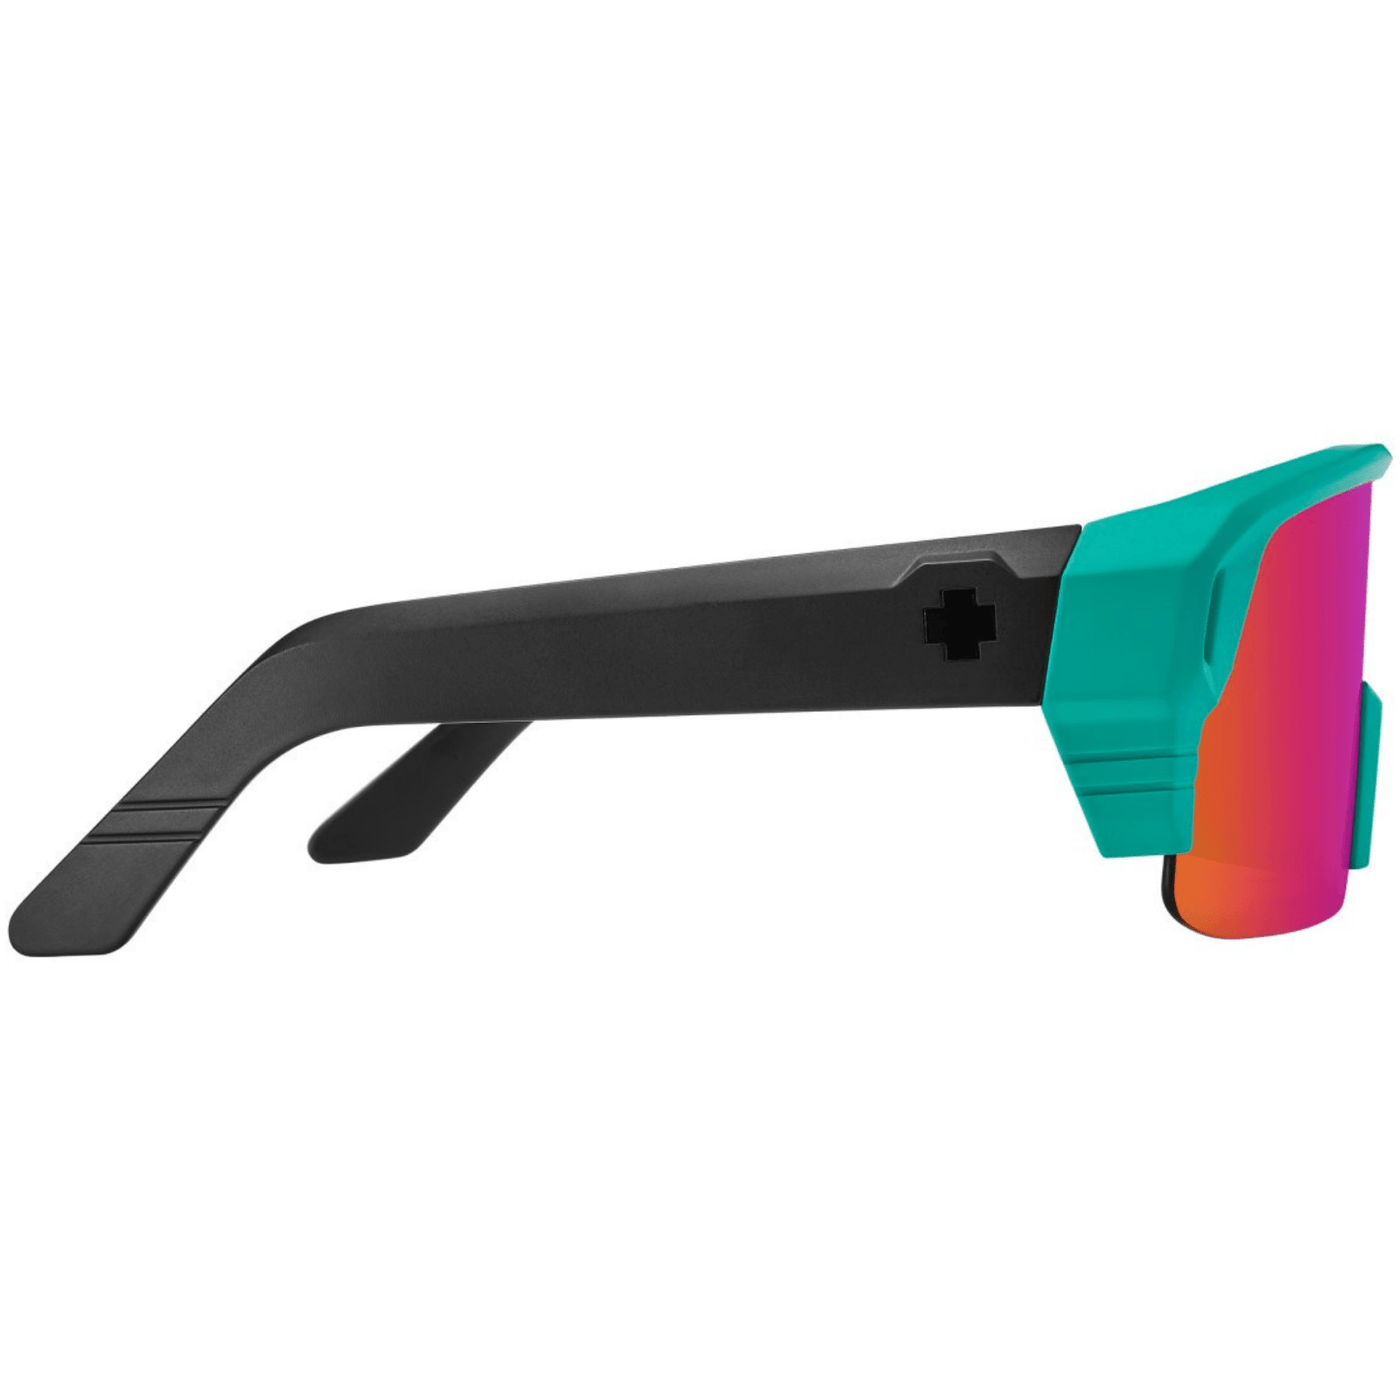 SPY MONOLITH 5050 Sunglasses, Happy Lens - Pink 8Lines Shop - Fast Shipping